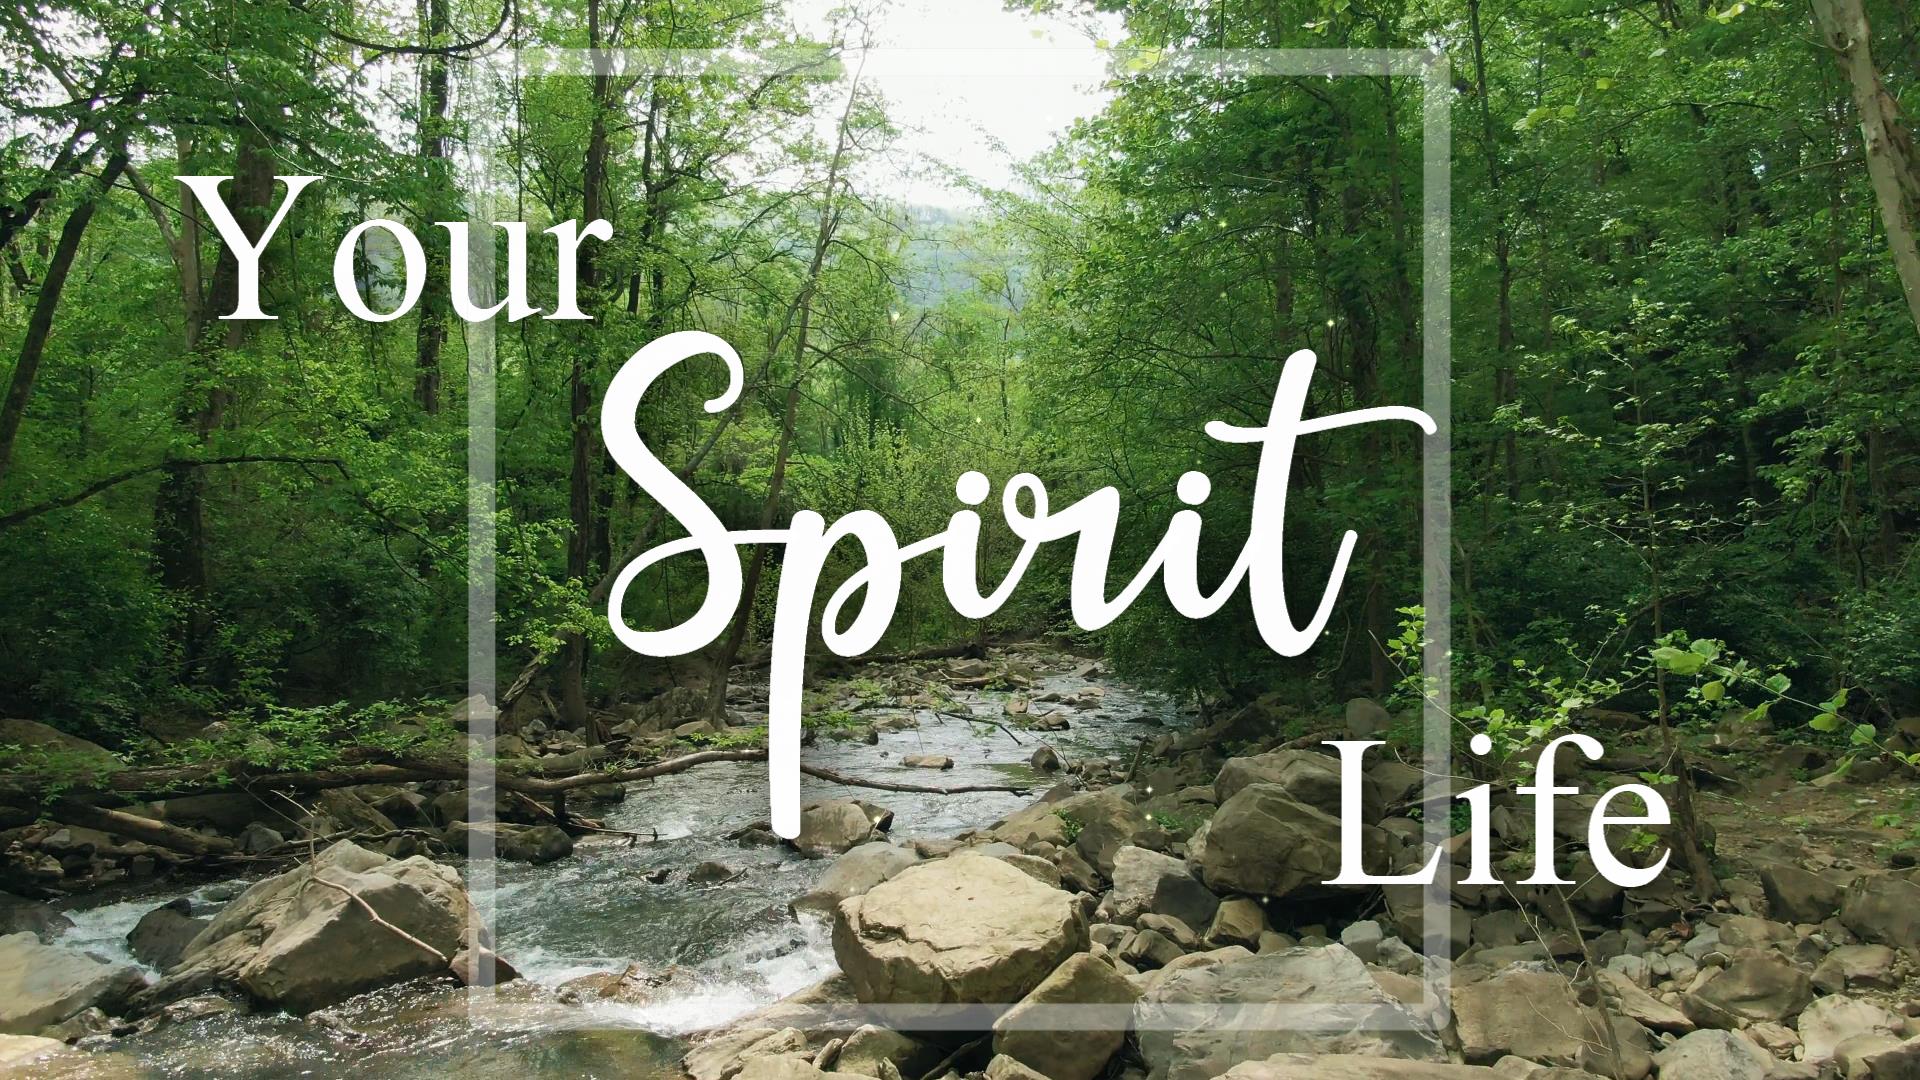 YOUR SPIRIT LIFE with Aliss Cresswell